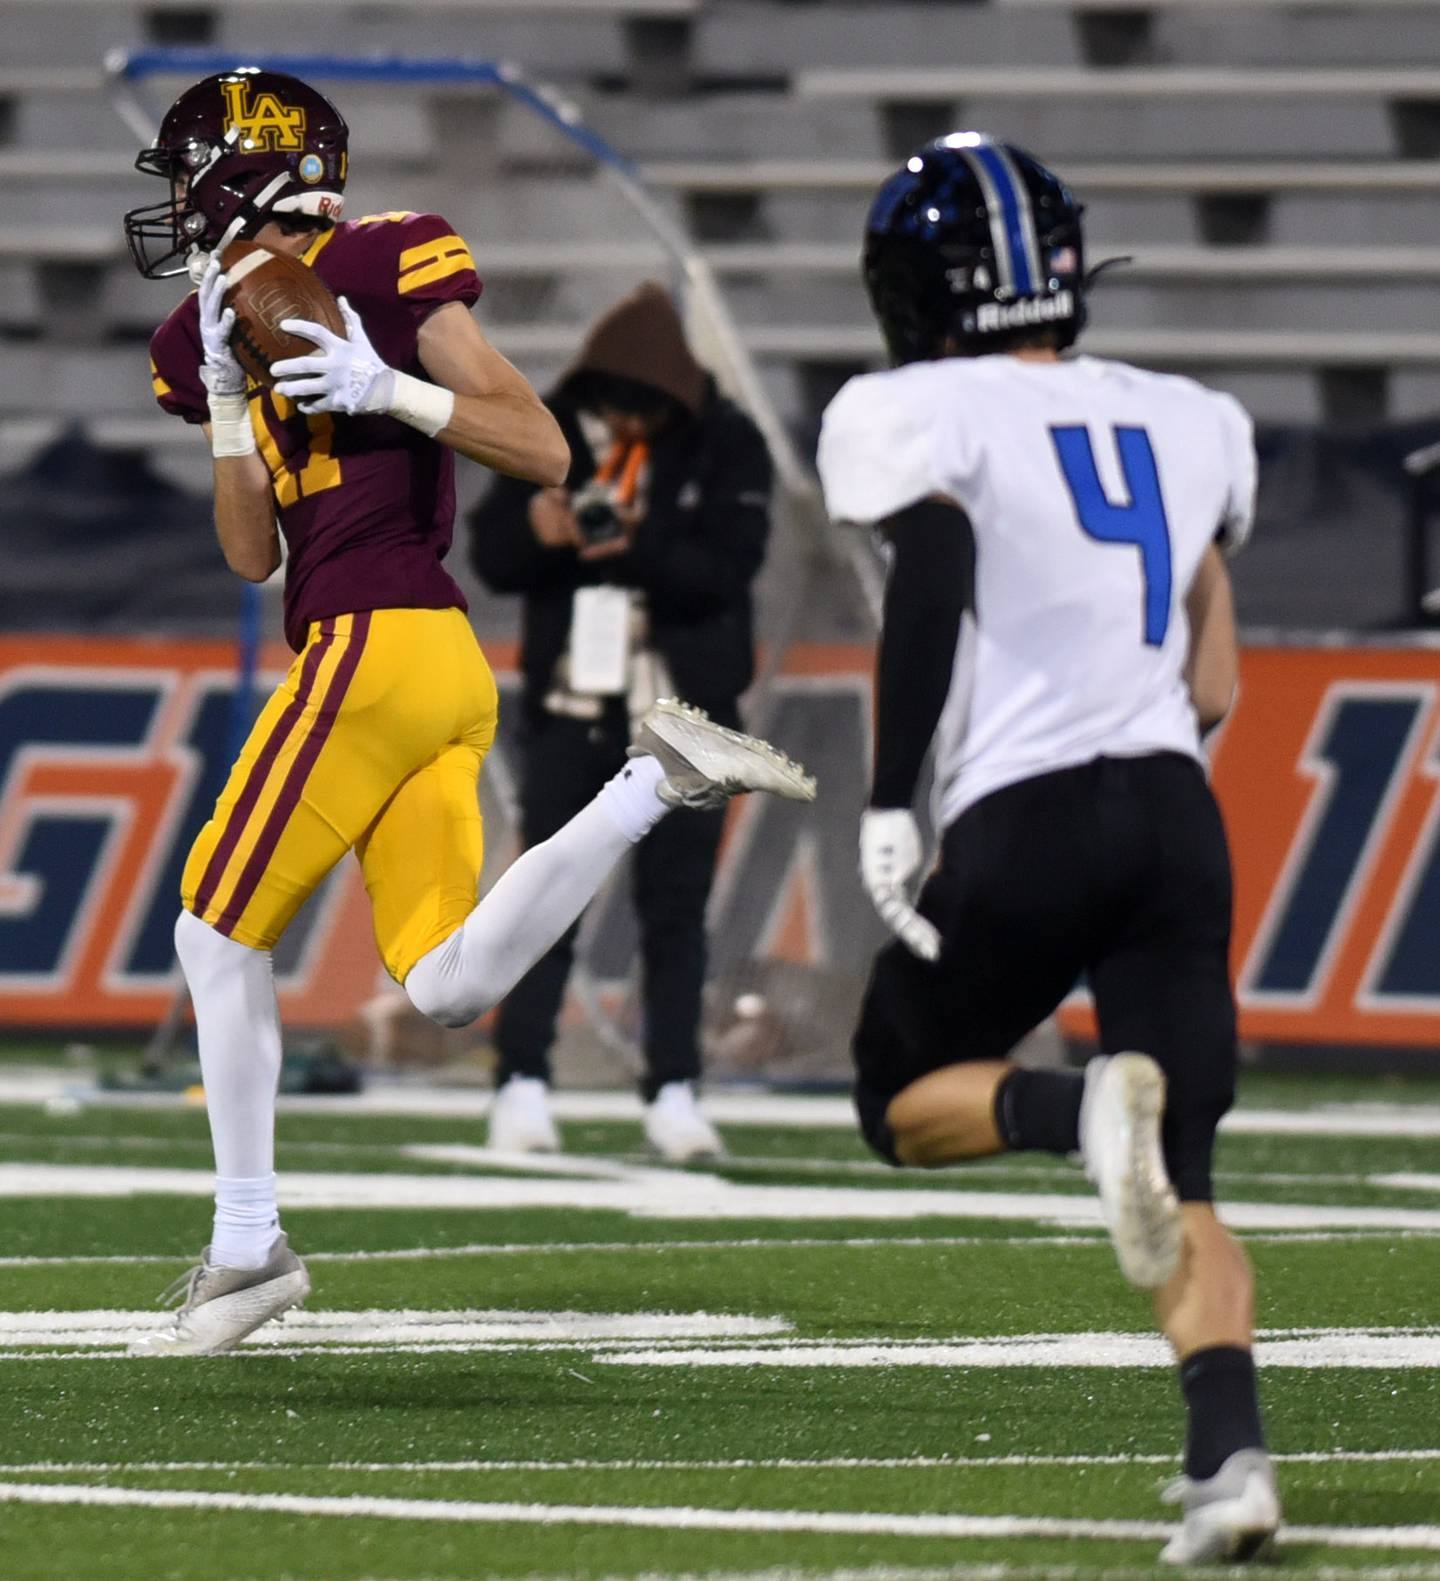 Loyola Academy's Declan Forde makes a touchdown catch against Lincoln-Way East during the Class 8A football state title game at Memorial Stadium in Champaign on Saturday, Nov. 26, 2022.